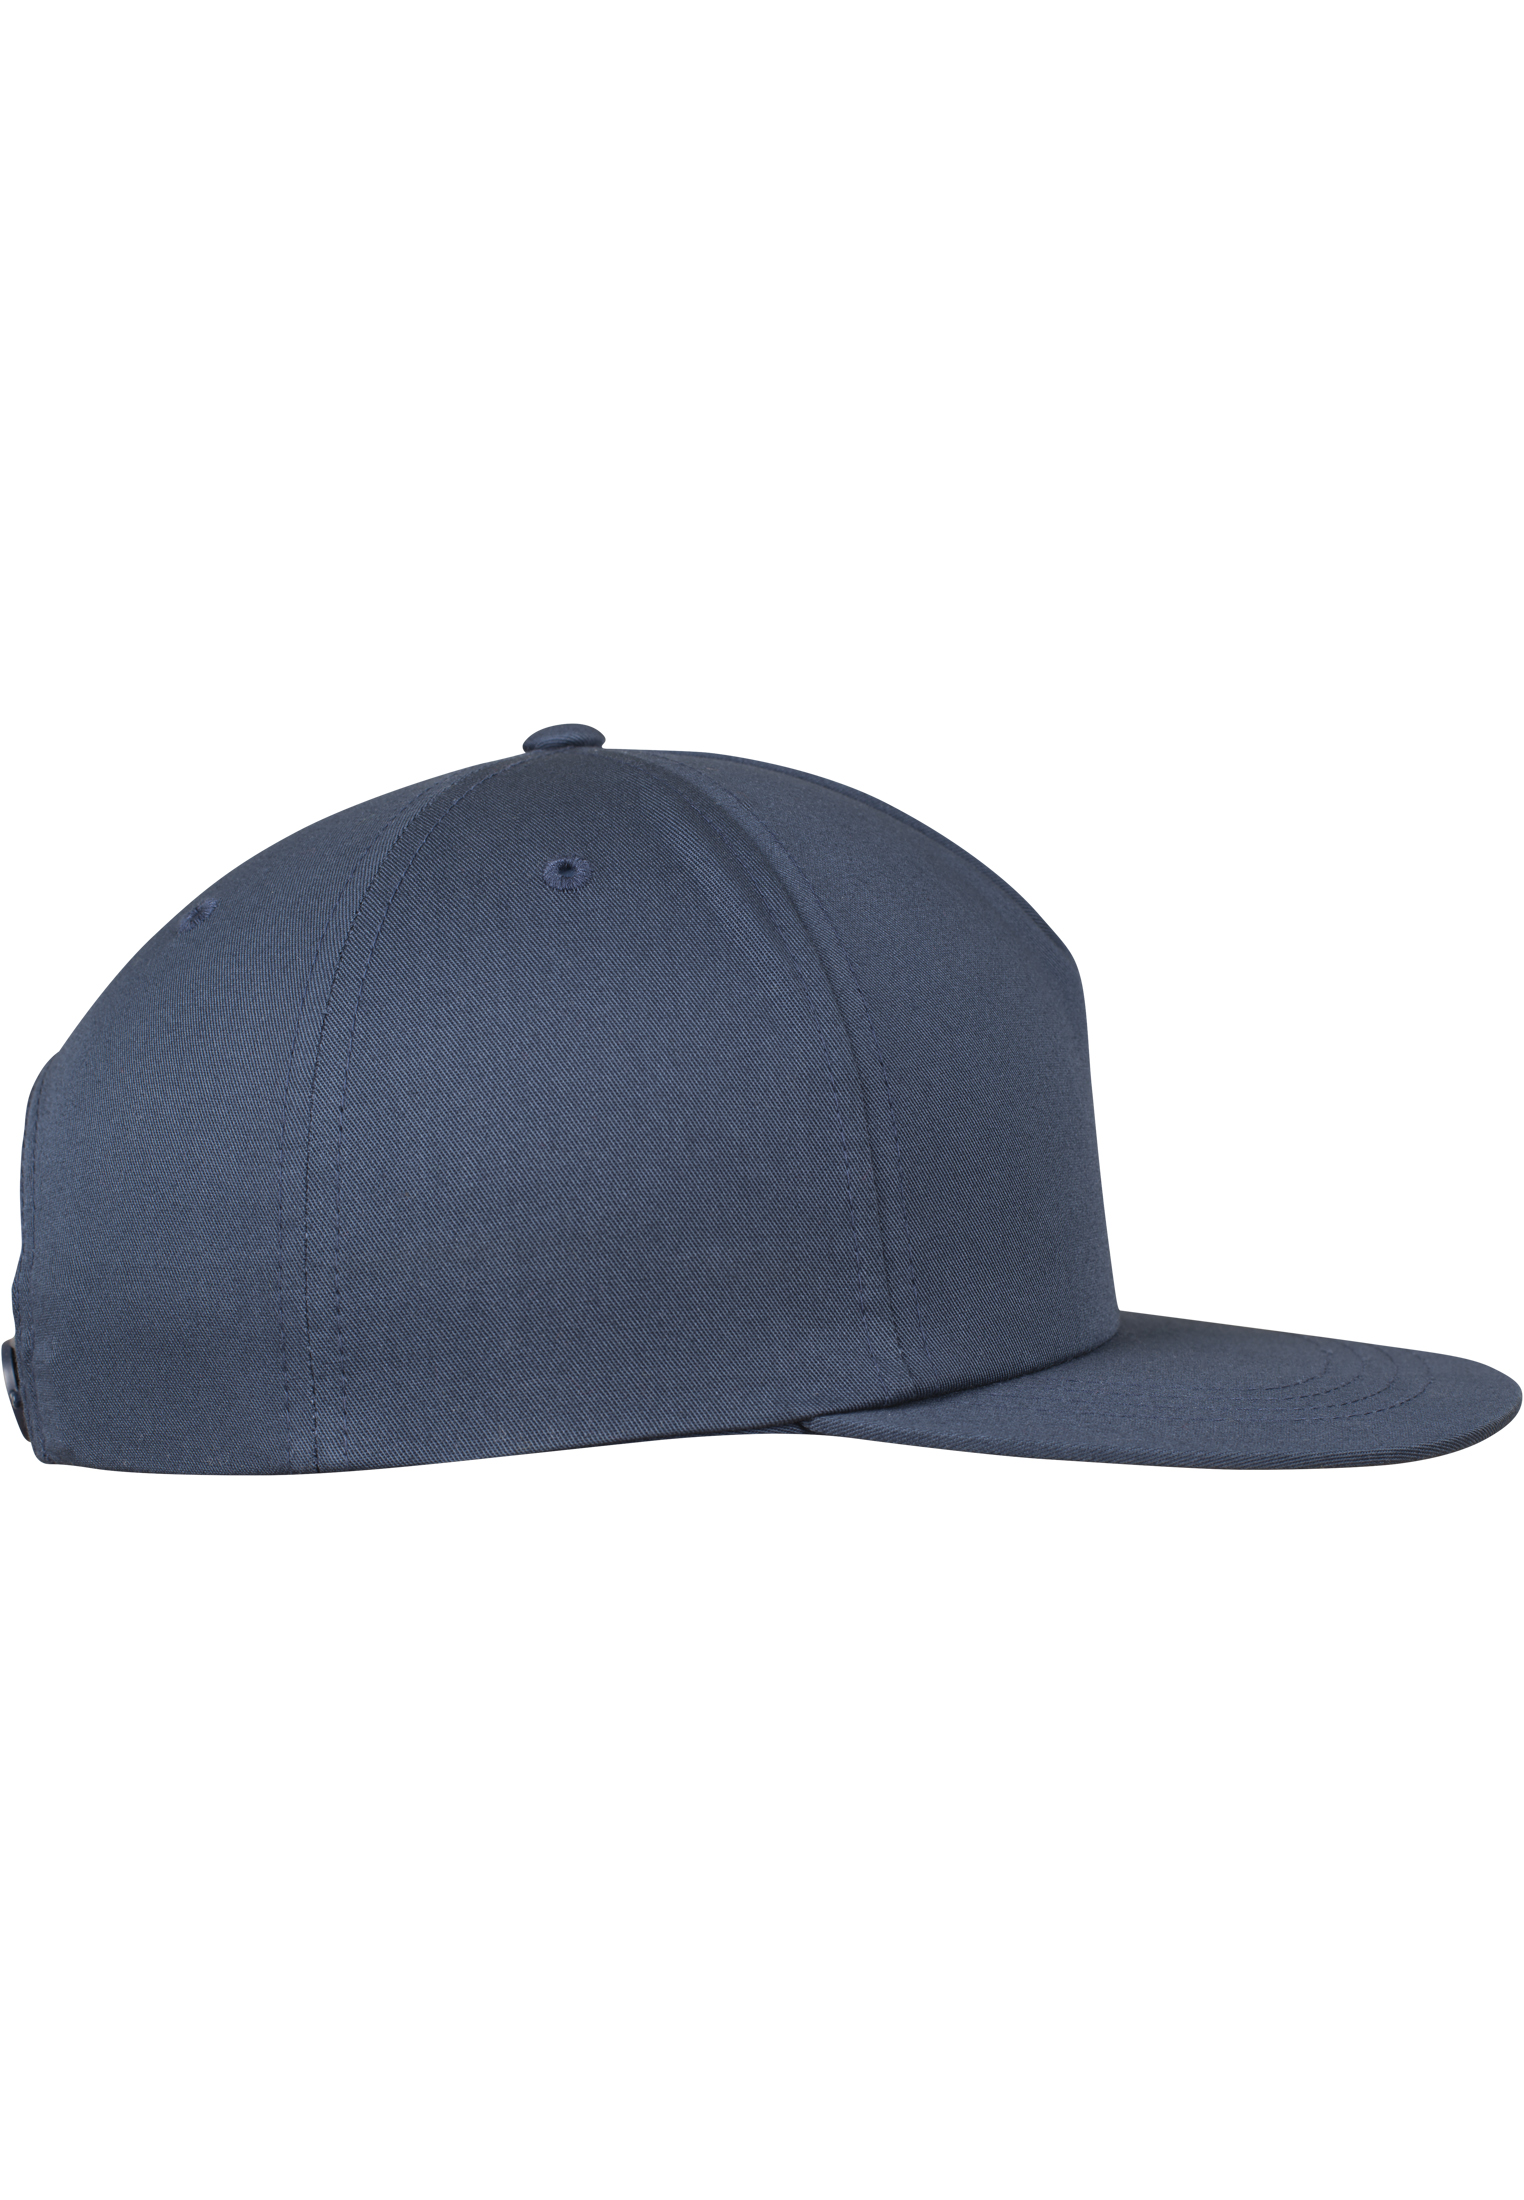 Snapback Unstructured 5-Panel Snapback in Farbe navy